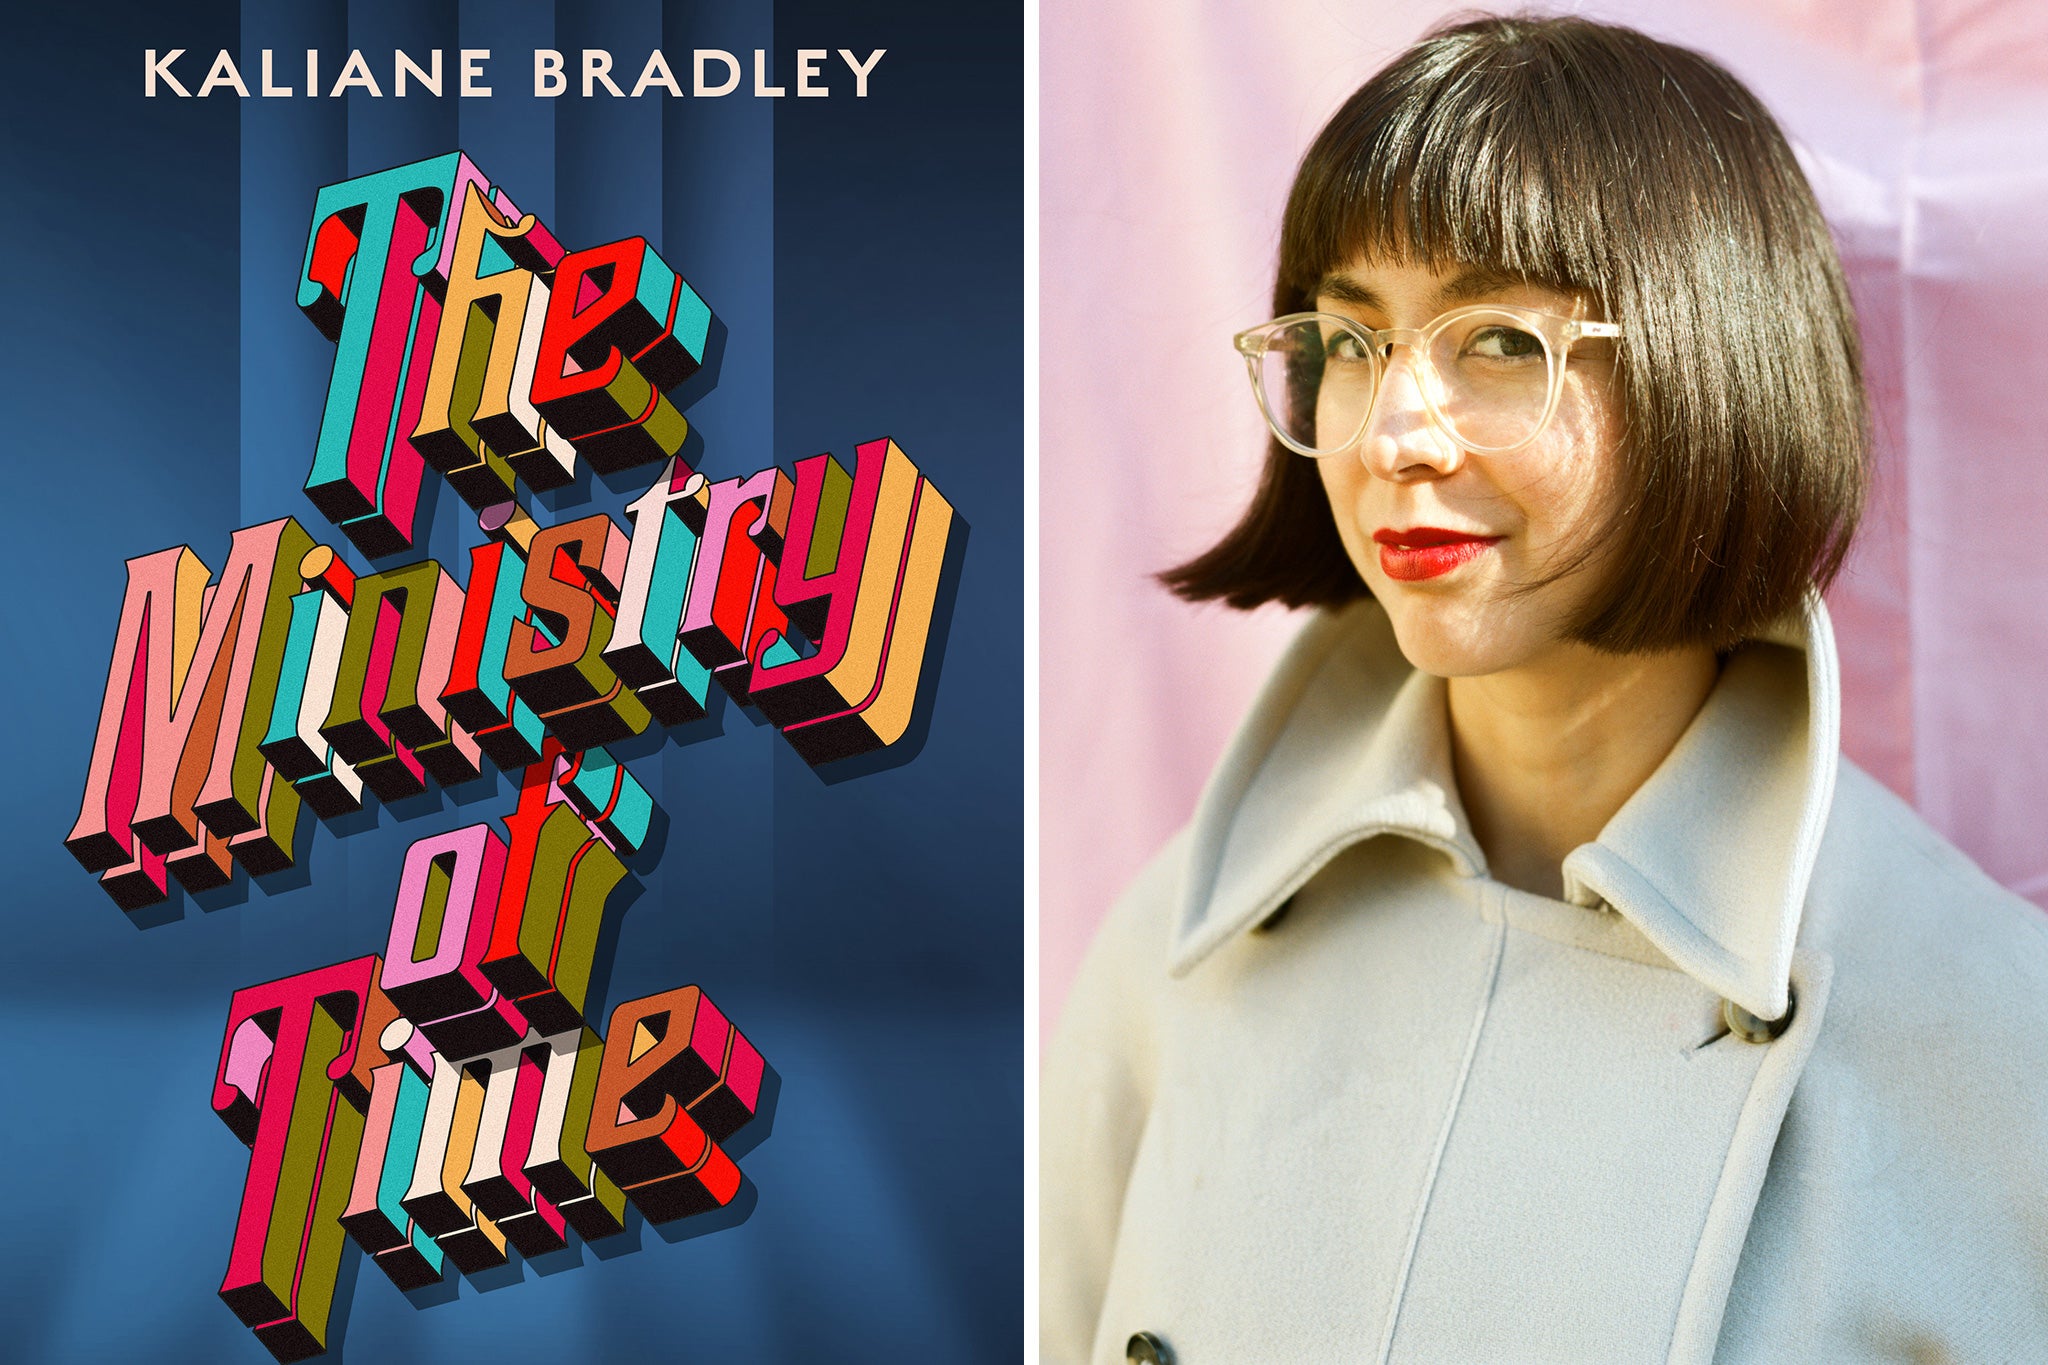 Kaliane Bradley will be talking about her much-anticipated debut novel with Francis Spufford